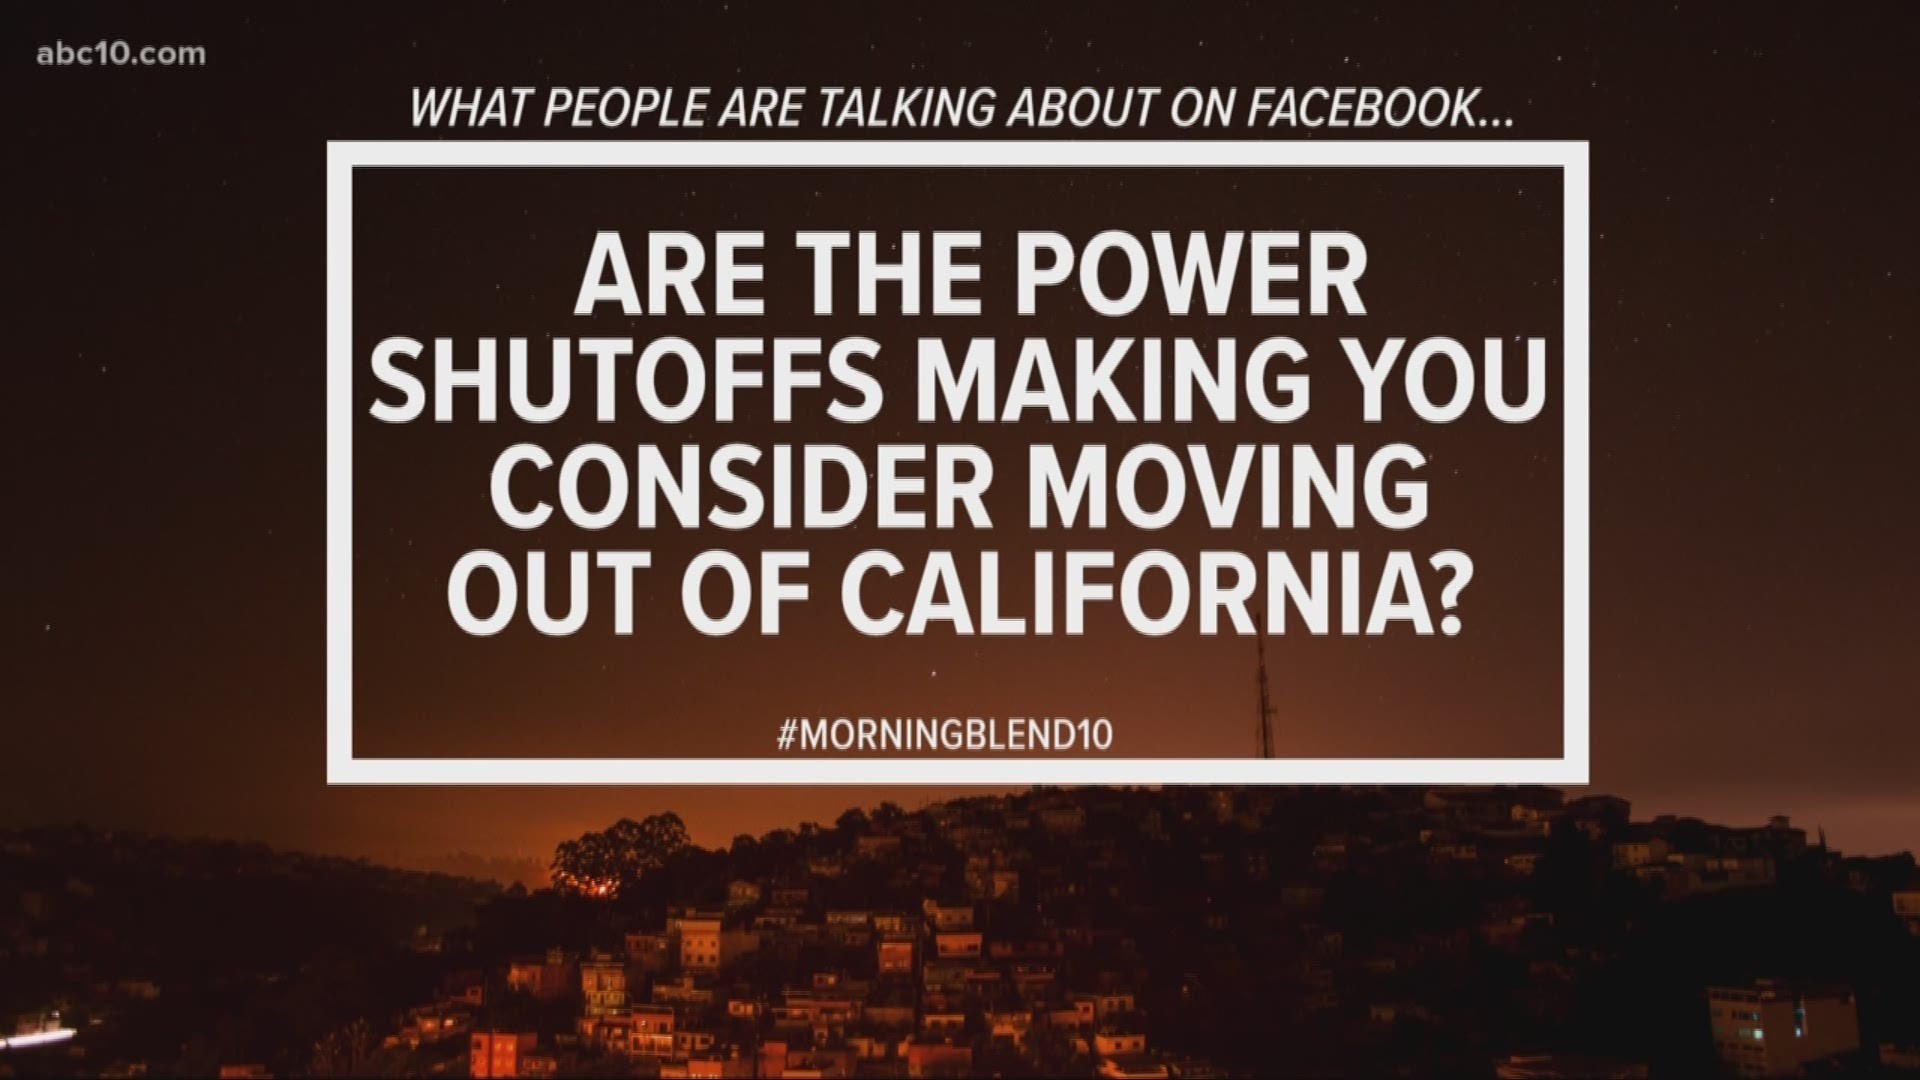 A new study finds more people are moving out of California than moving into it. We want to know if the ongoing power shutoffs have you considering a move.